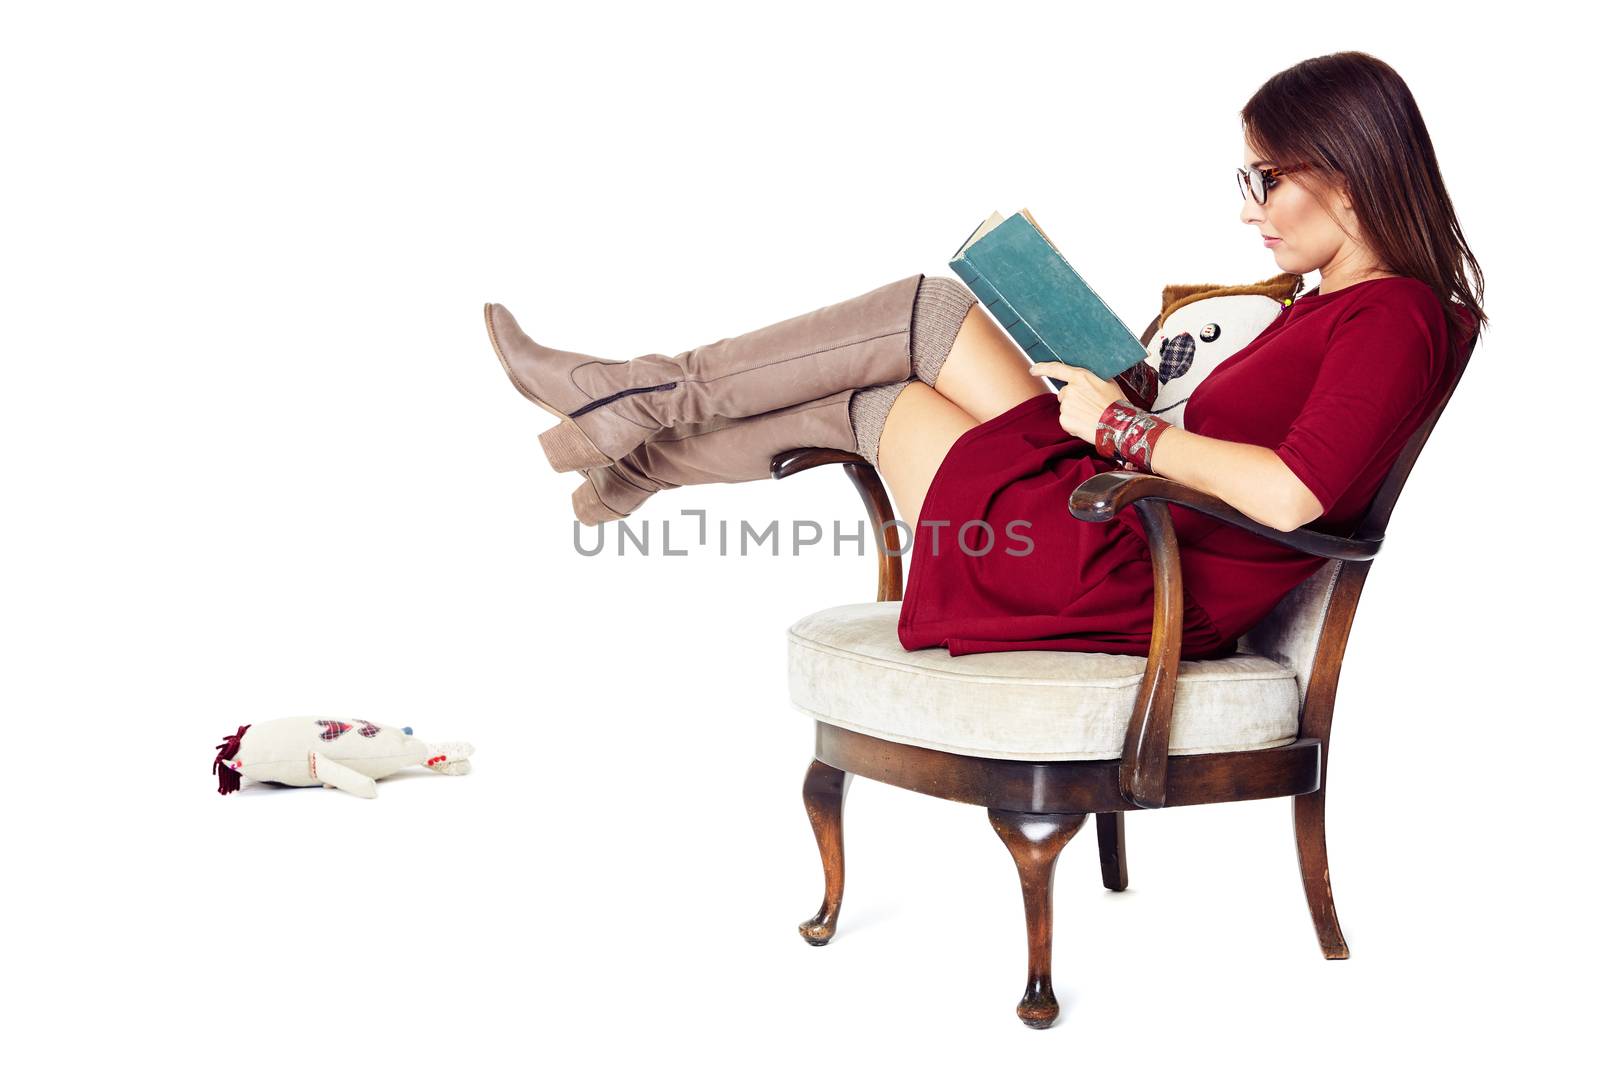 Attractive woman reading a book while sitting comfortably in an old chair.